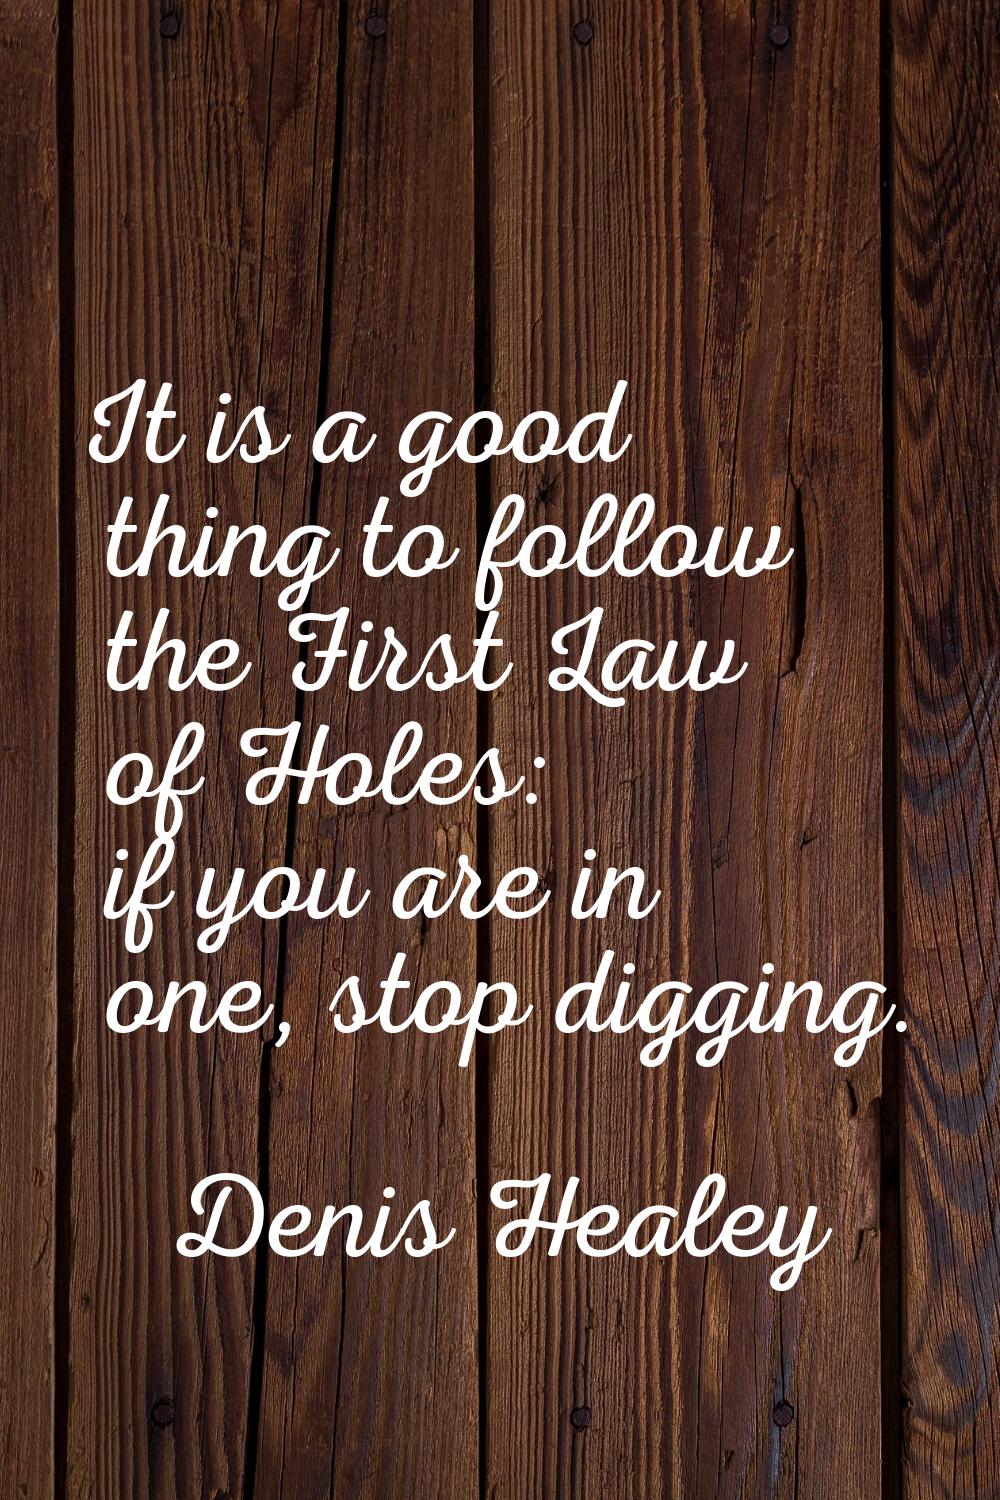 It is a good thing to follow the First Law of Holes: if you are in one, stop digging.